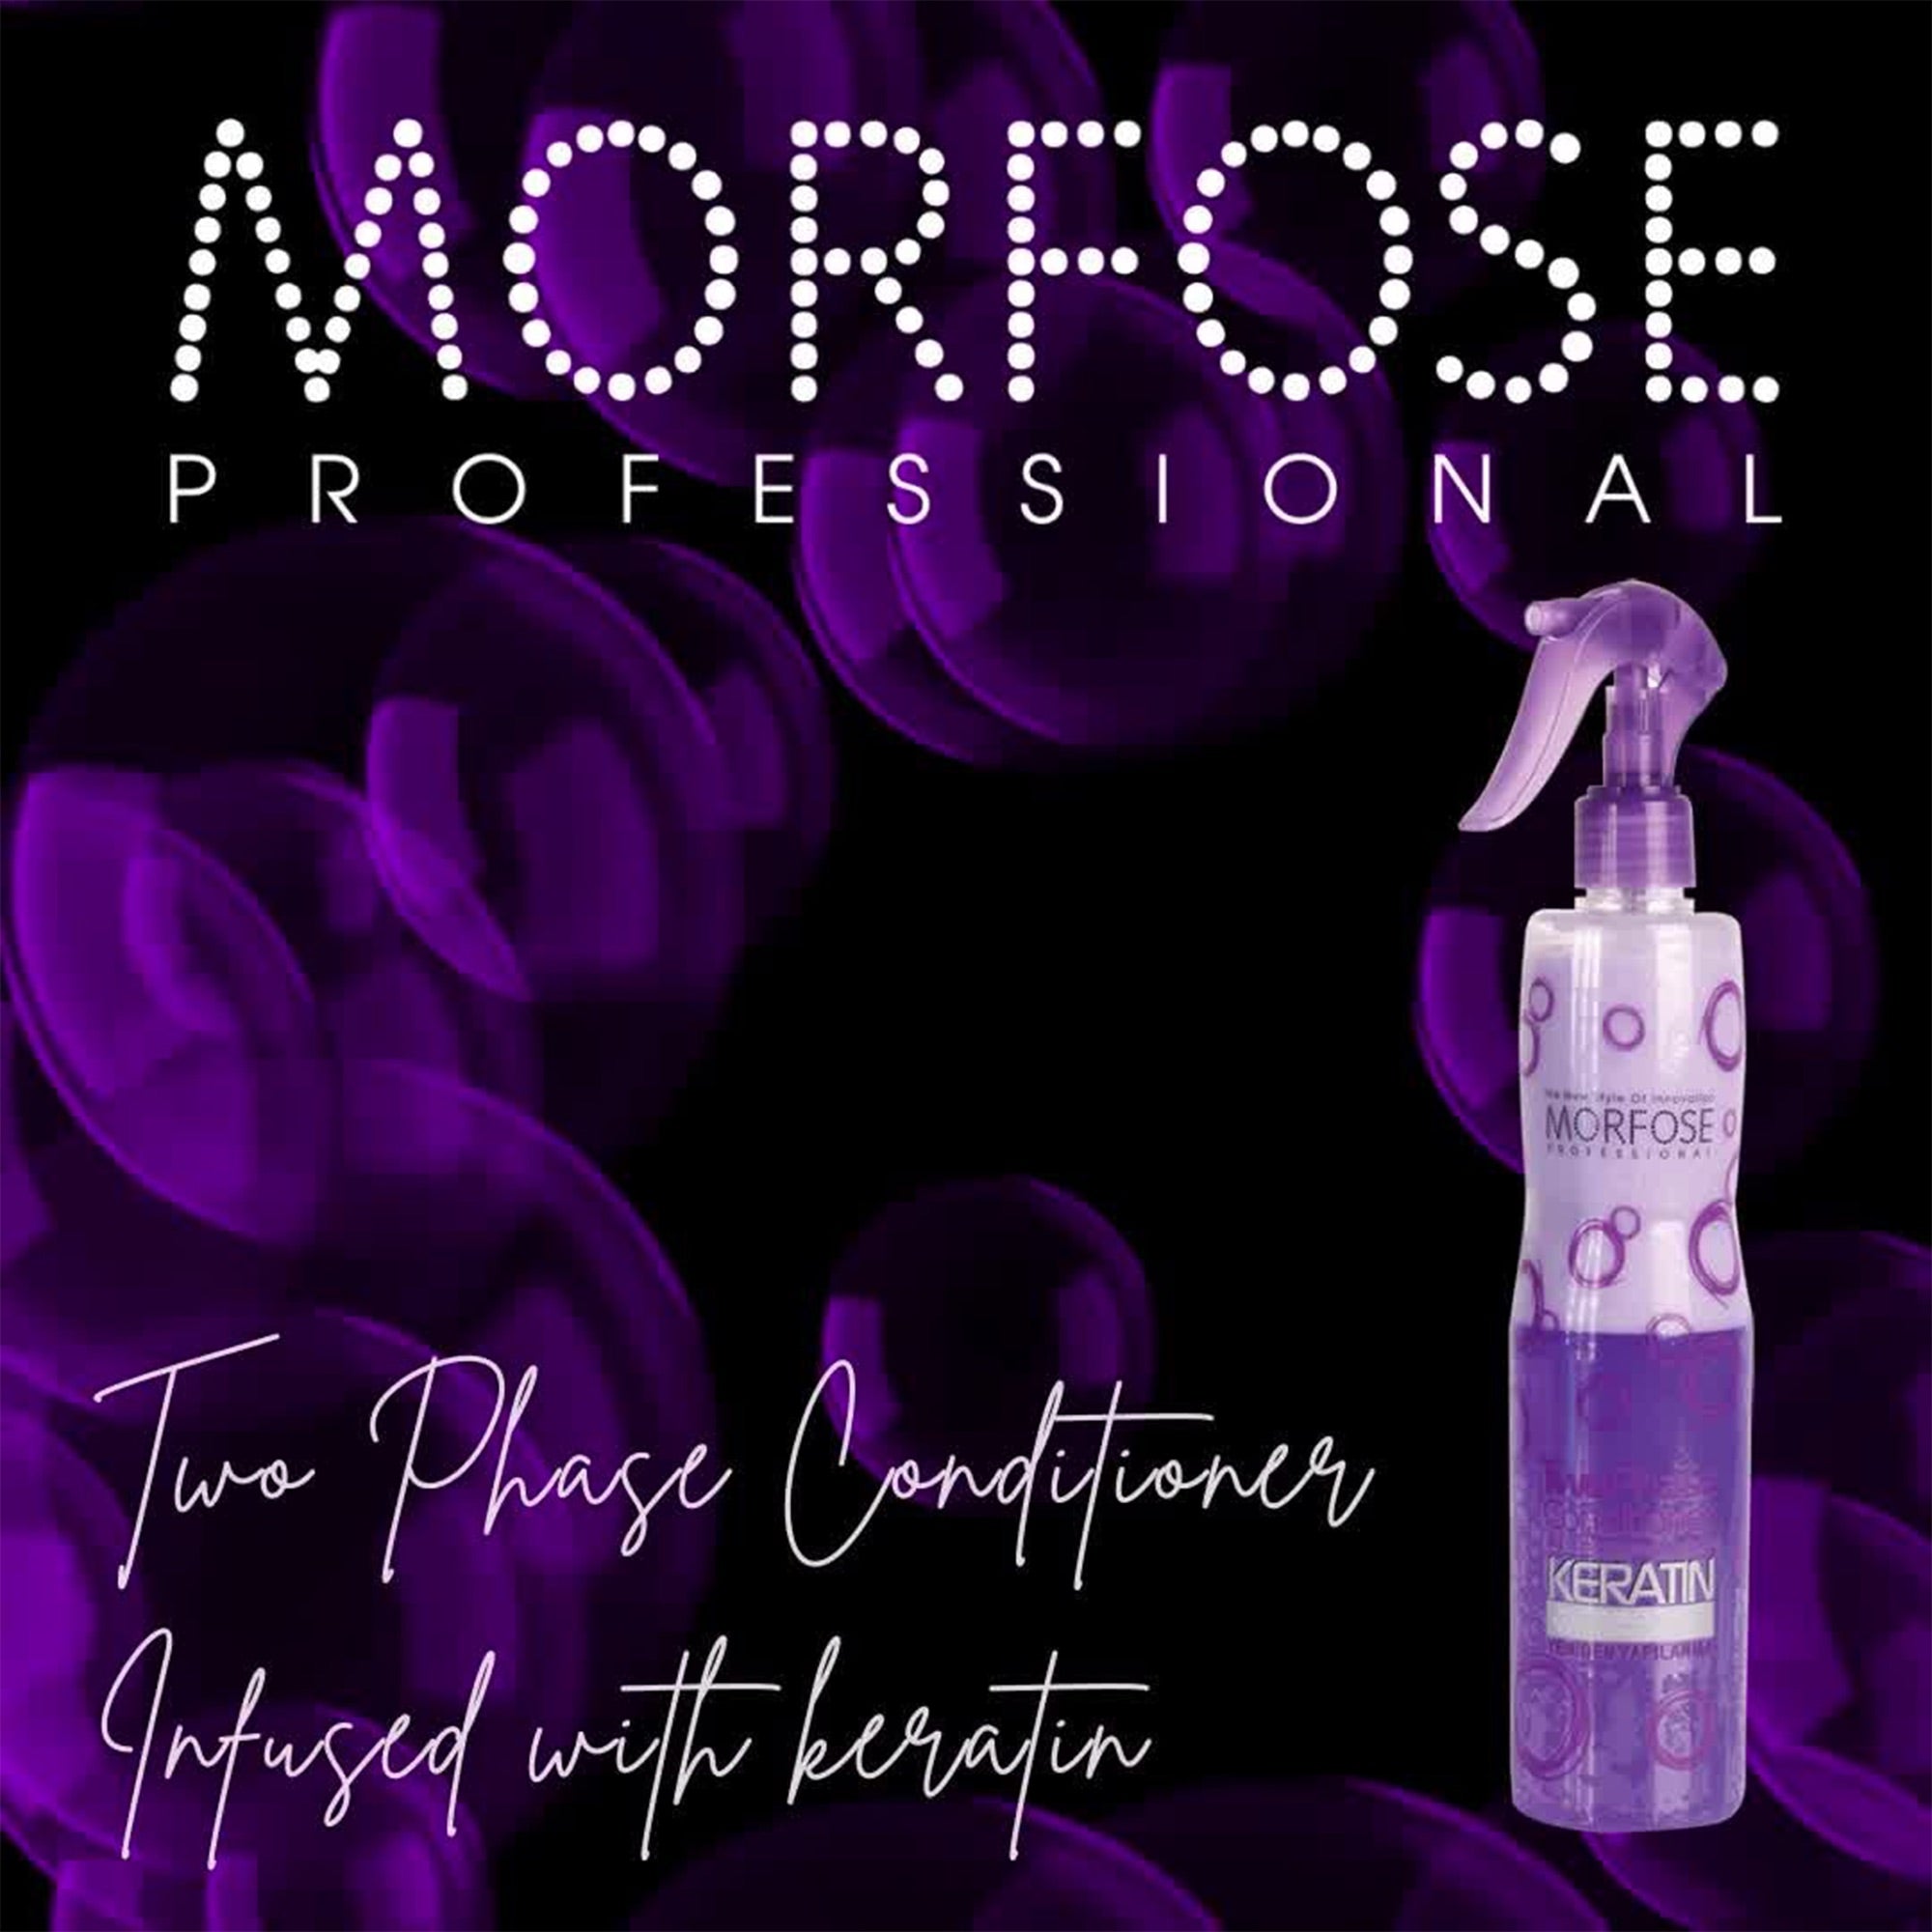 Morfose - Keratin Two Phase Conditioner 400ml